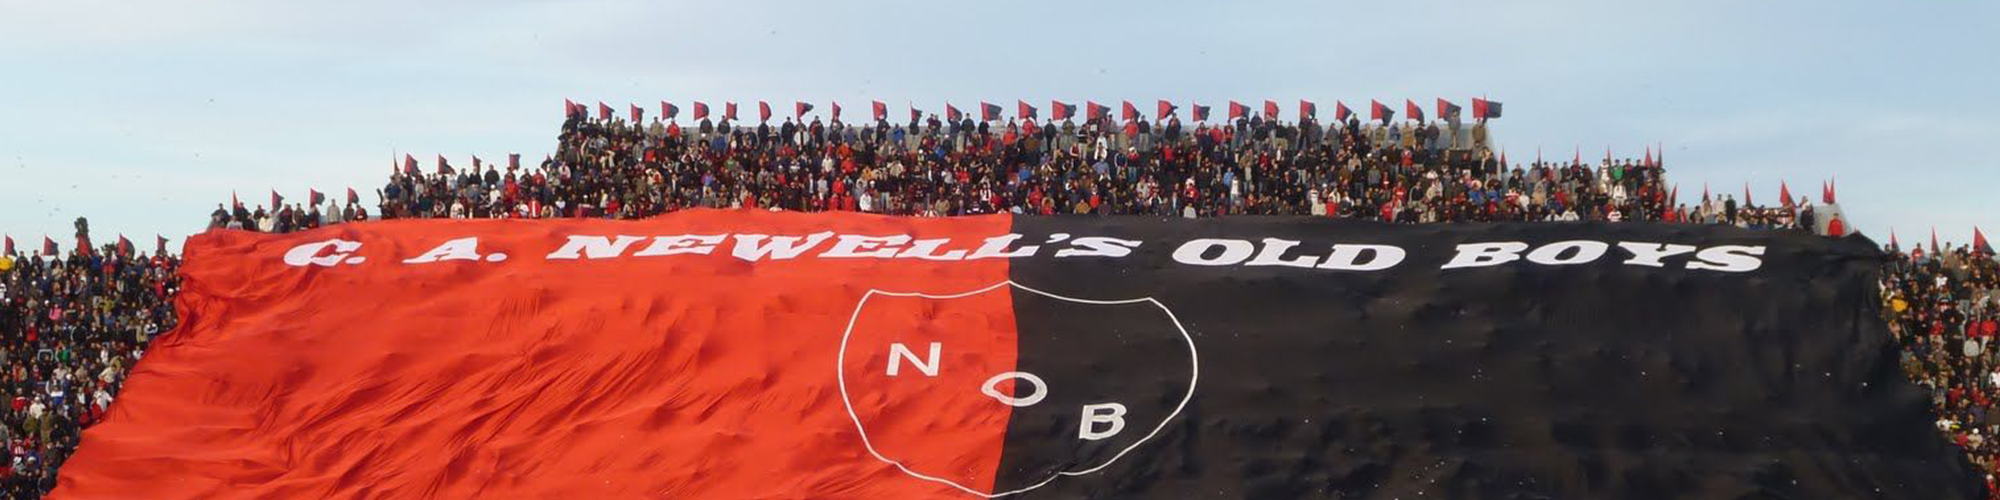 Newell's Old Boys Tickets & Experiences